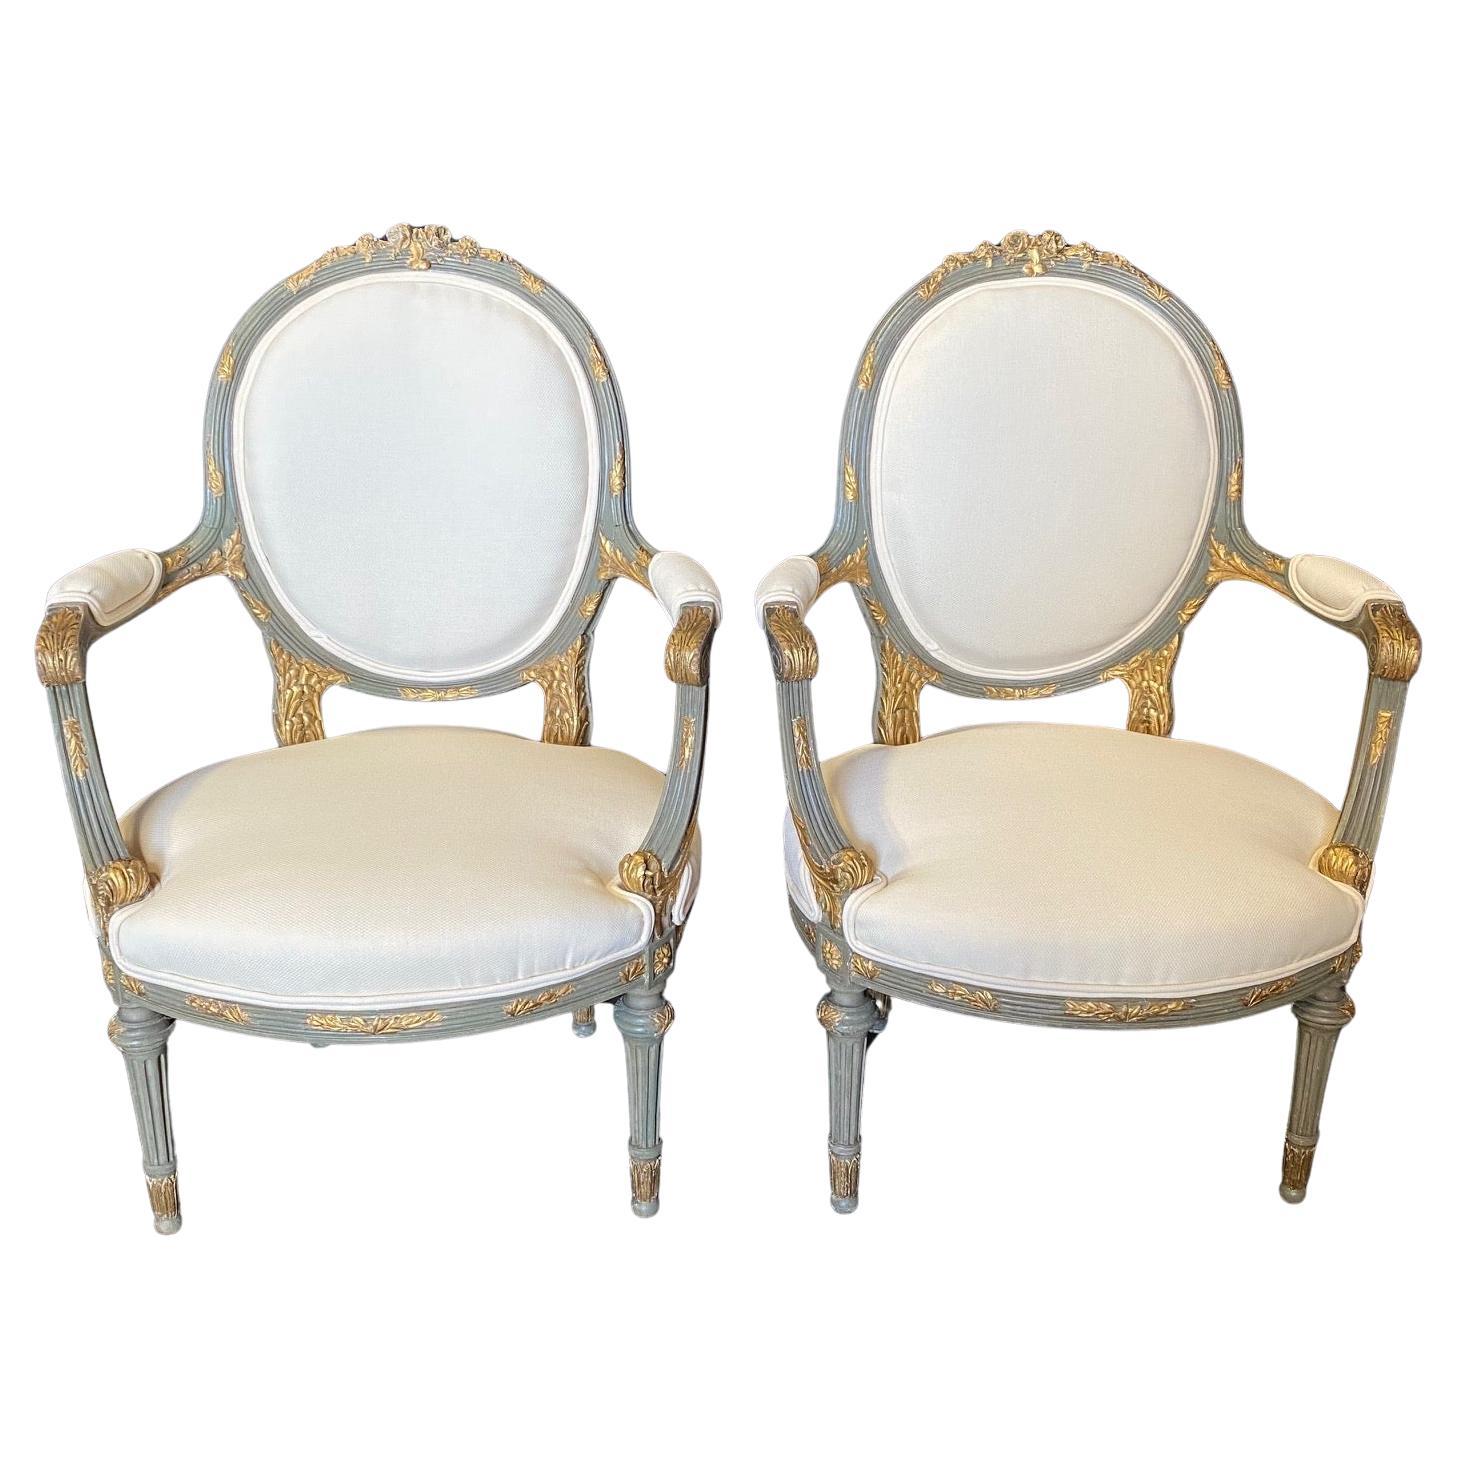  Neoclassic French Pair of 19th Century Period Louis XV Fauteuils or Armchairs For Sale